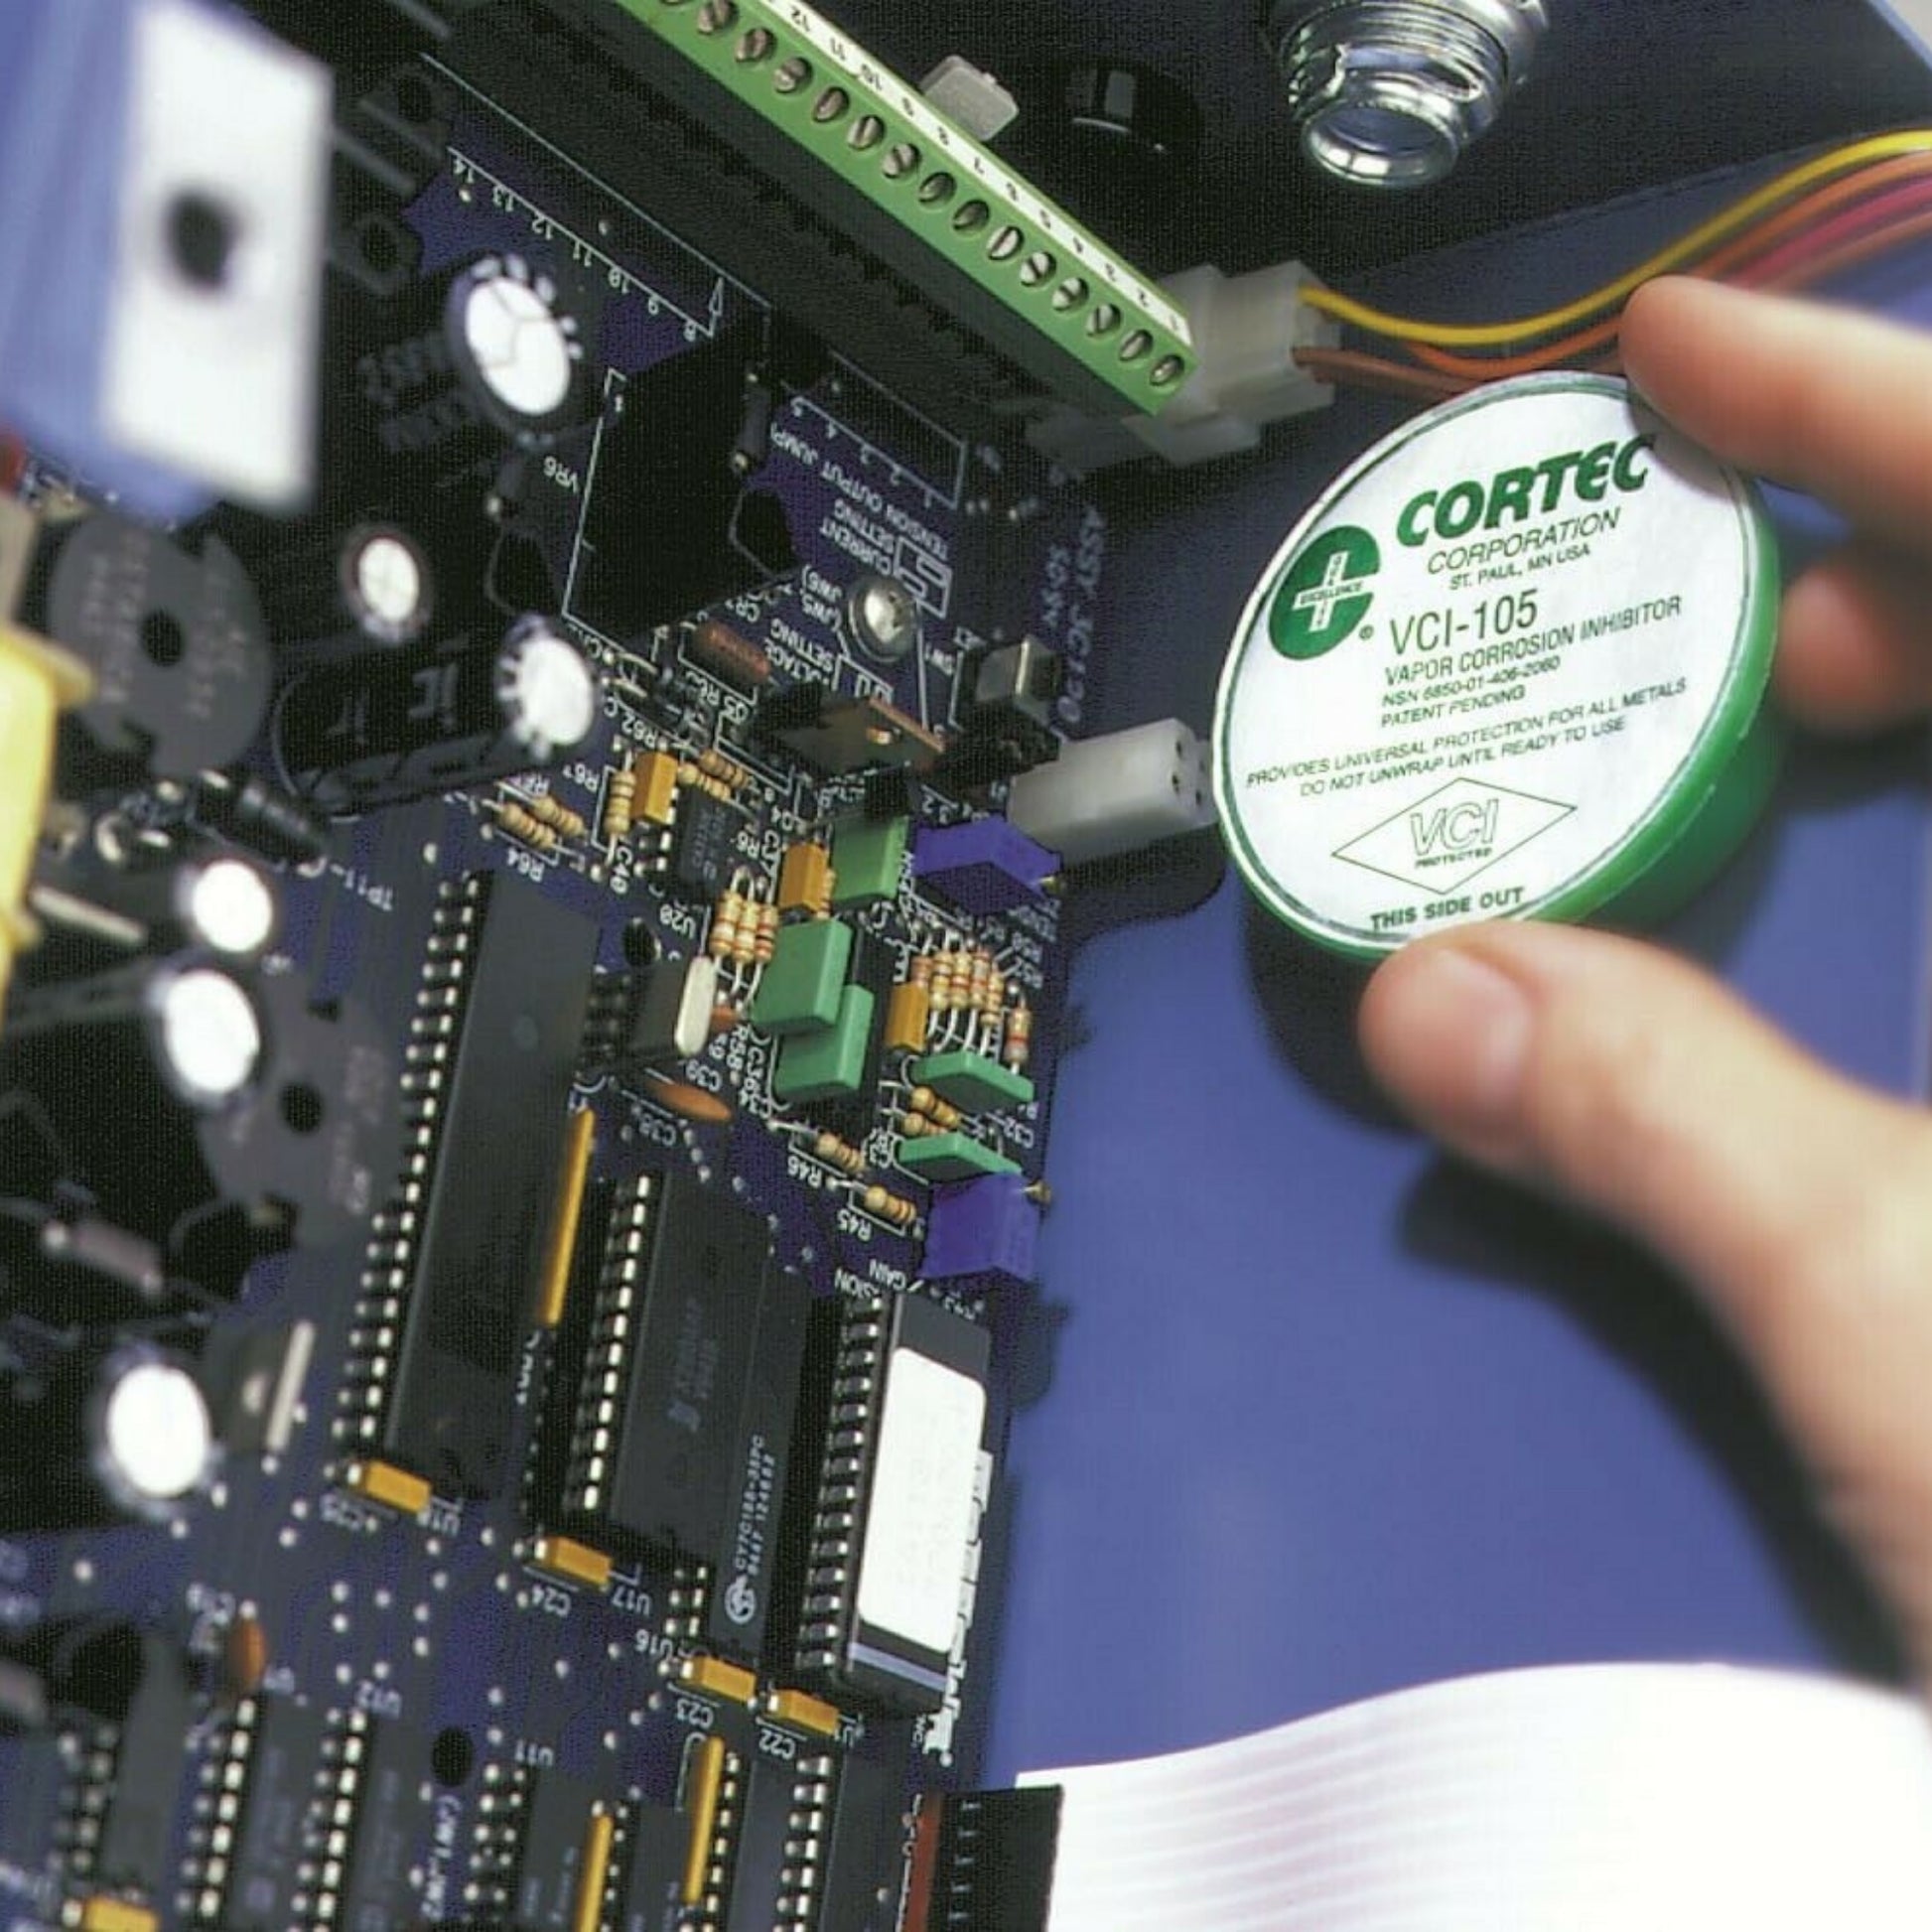 Cortec VpCI-105 VCI anti rust emitter inside an electronic cabinet